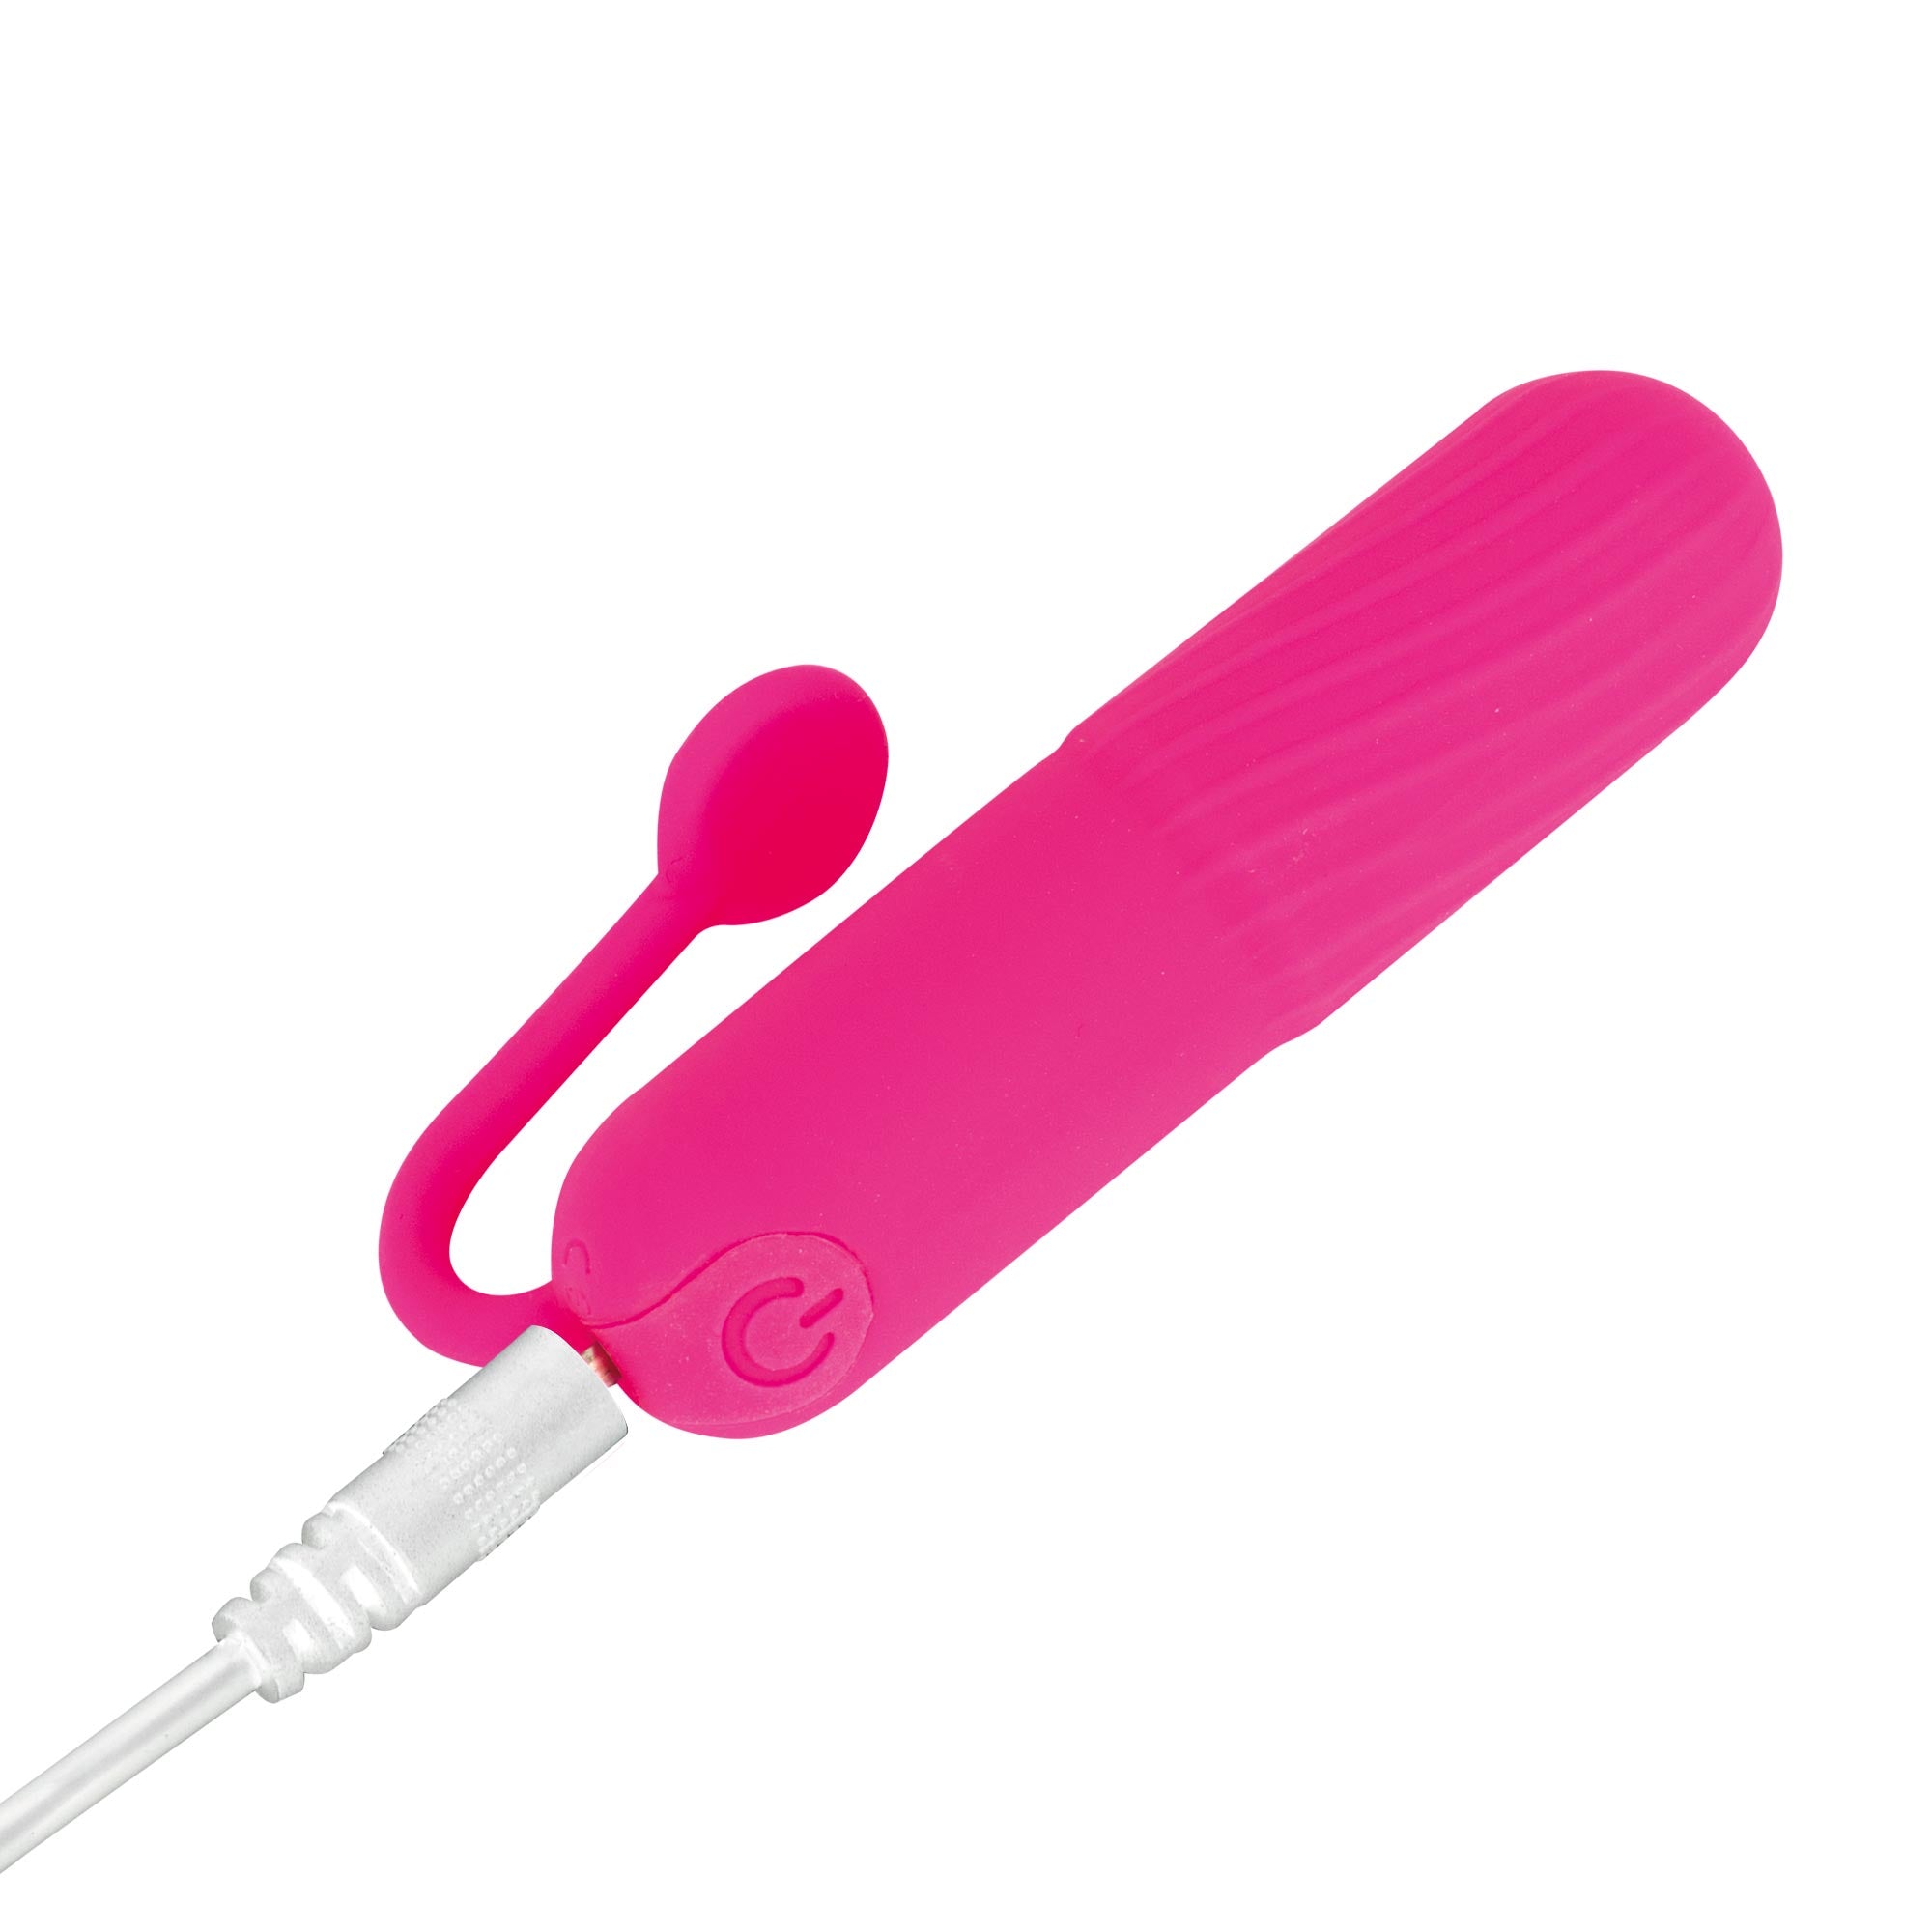 Bullet 4 Love - Rechargeable vibe with tail - Pink   RK-01 PNK